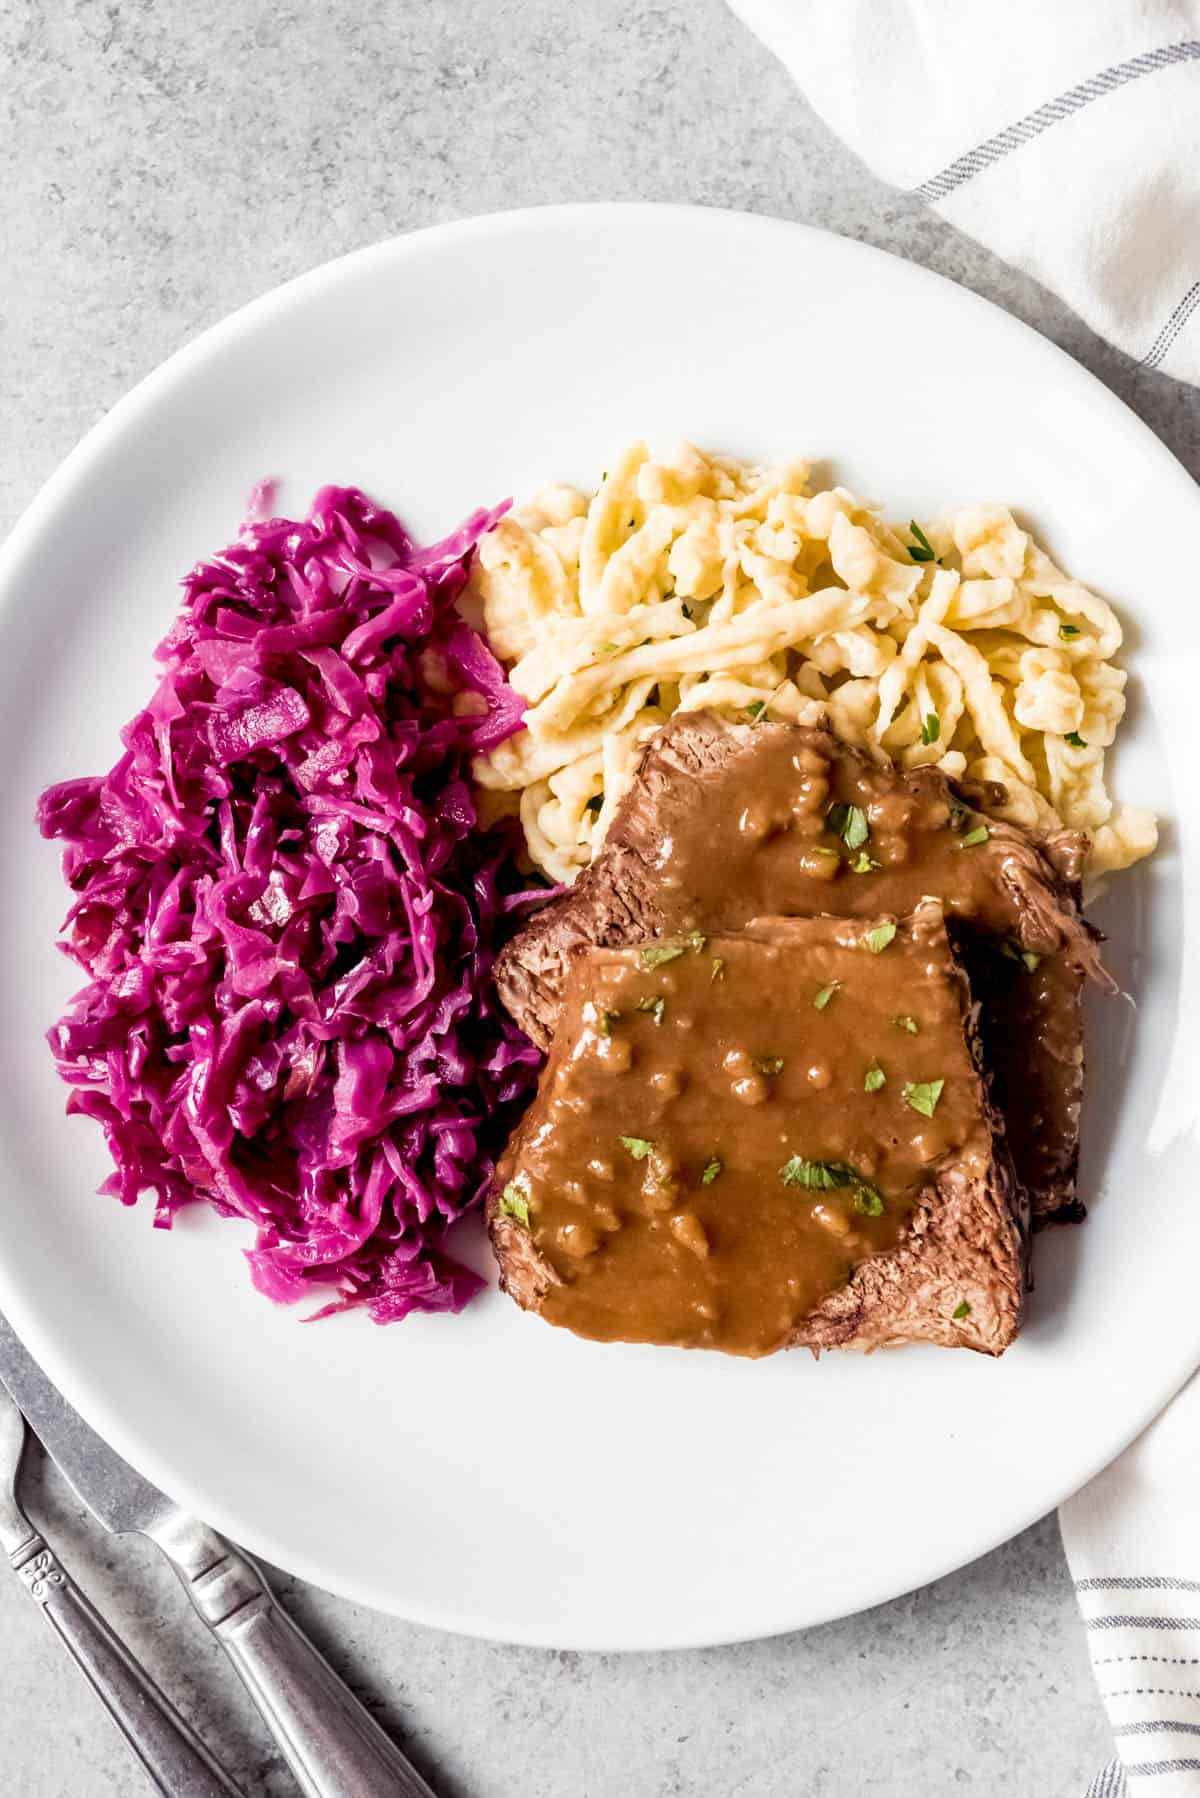 Delectable Sauerbraten Dish with Red Cabbage and Spaetzle Wallpaper